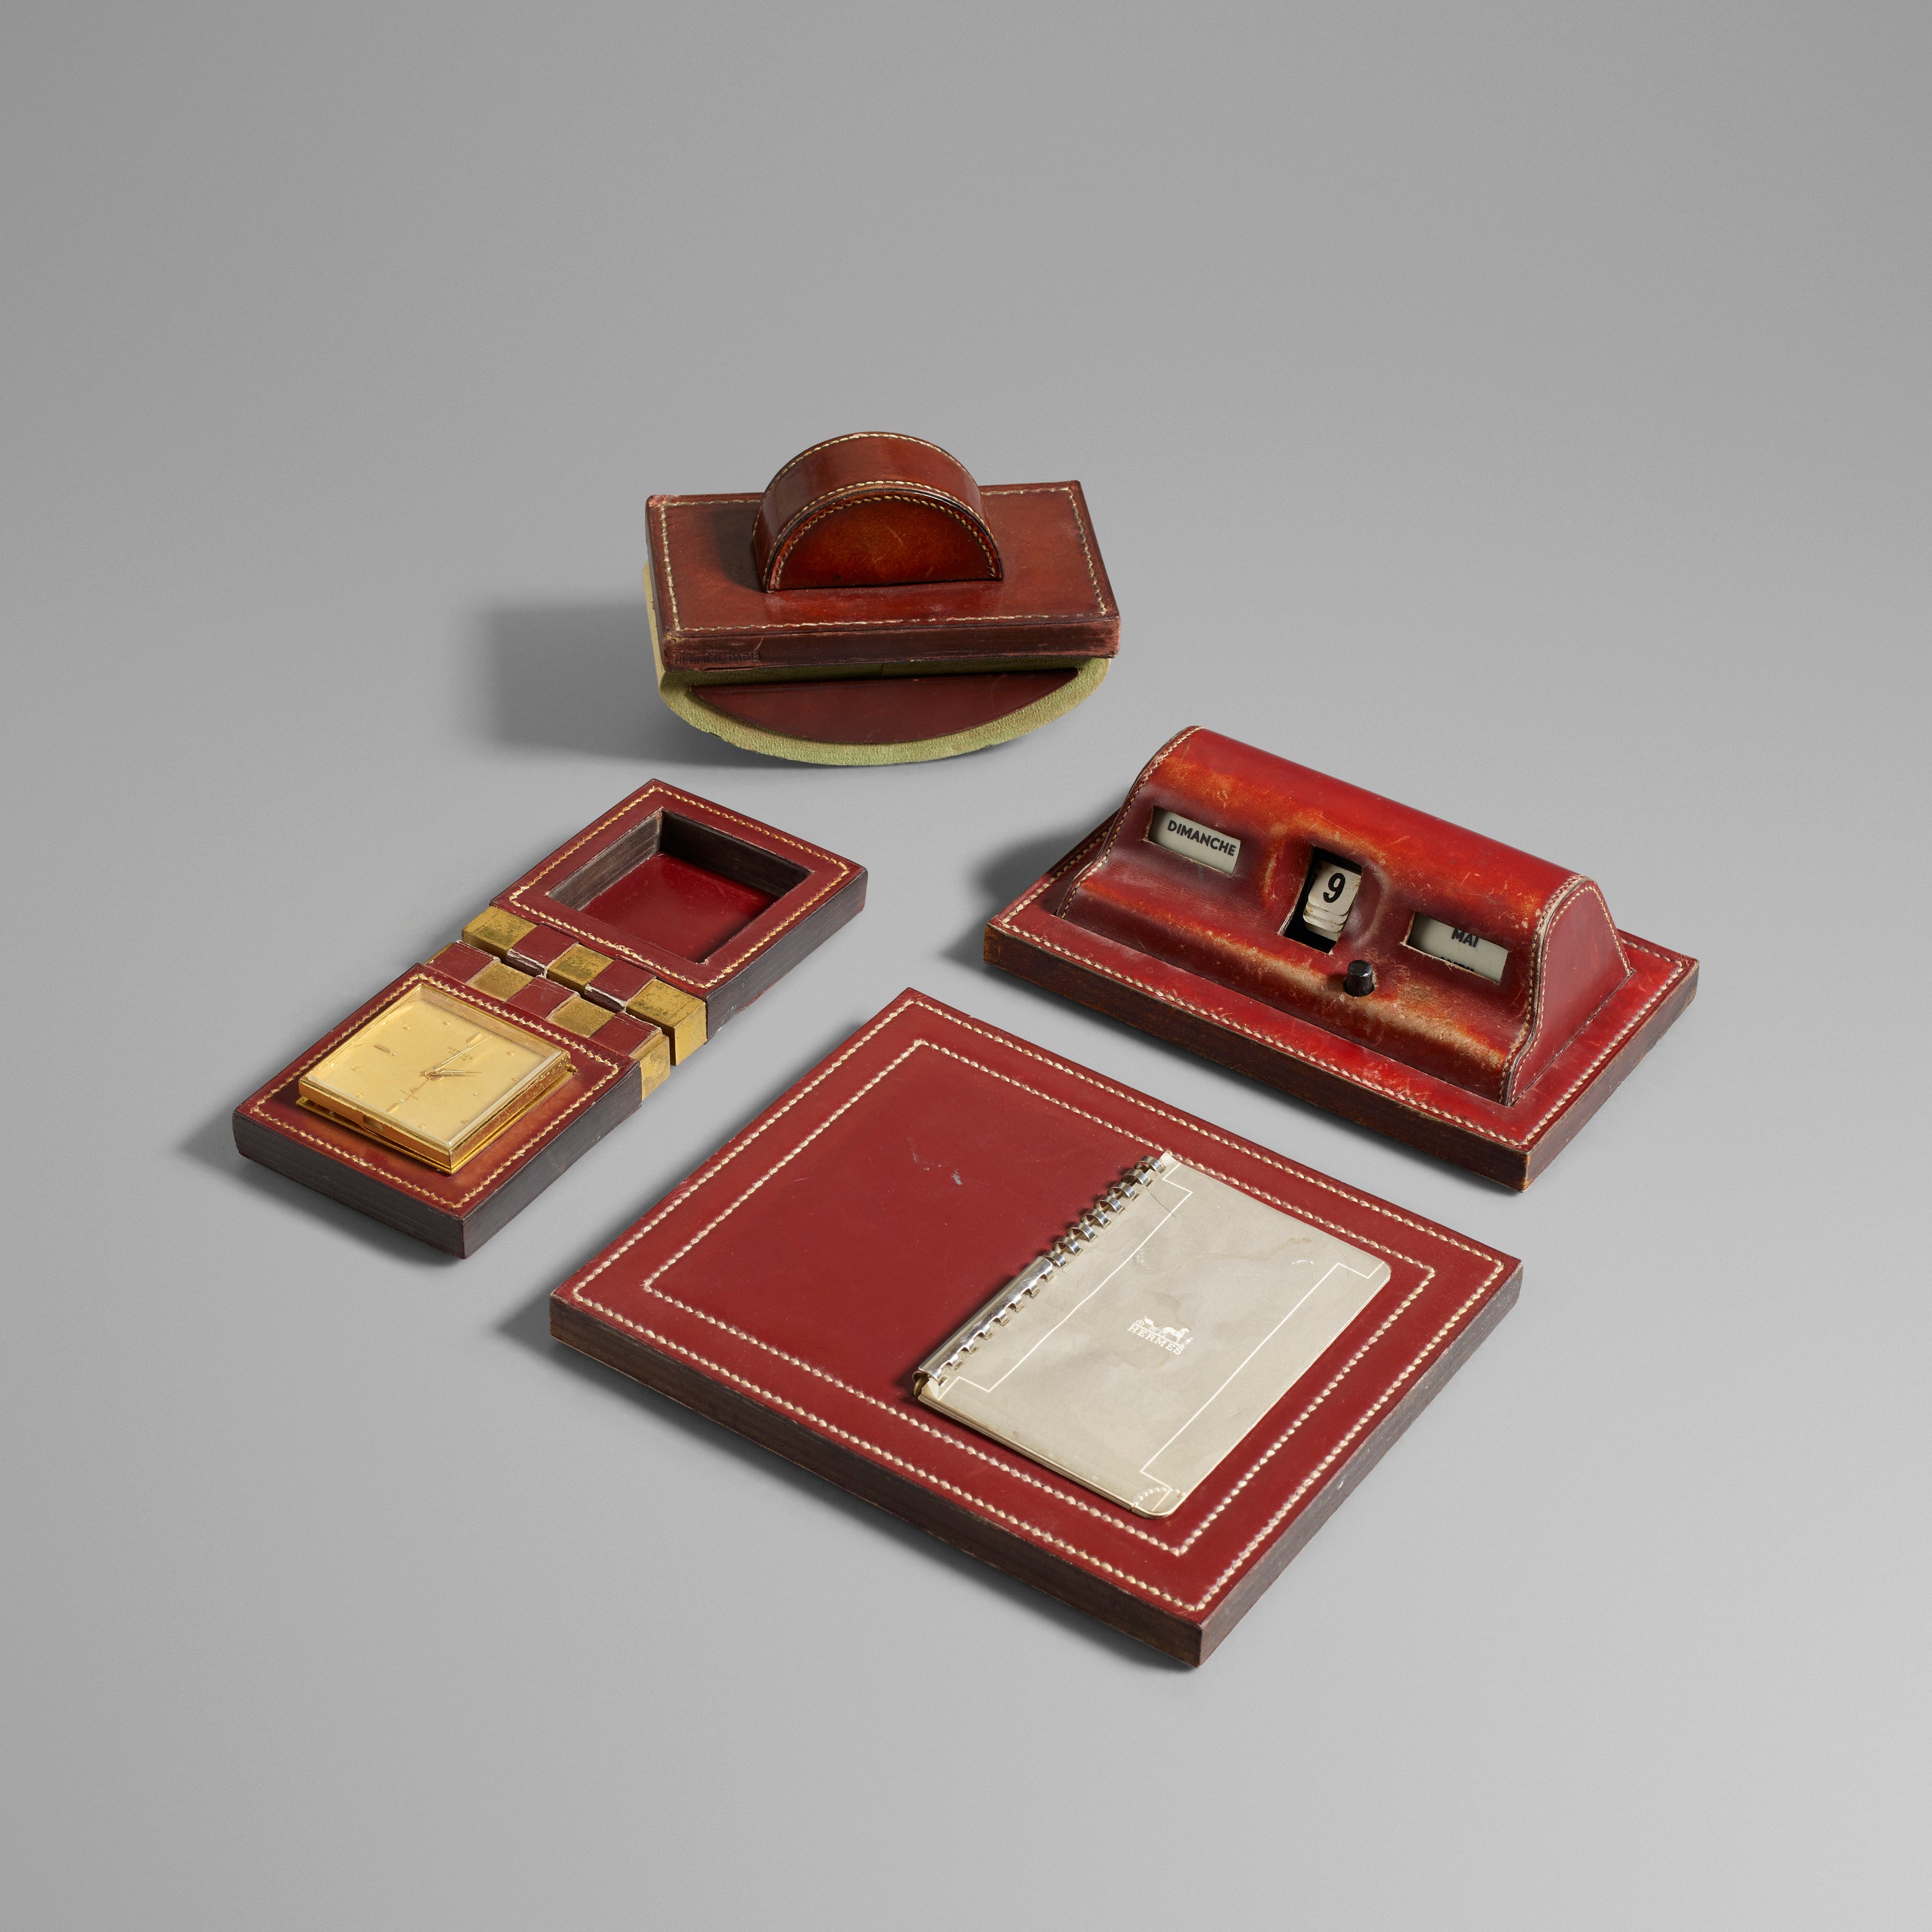 Hermes desk set full in How Paul Dupré-Lafon Became ‘The Decorator of Millionaires’ for A Collected Man London